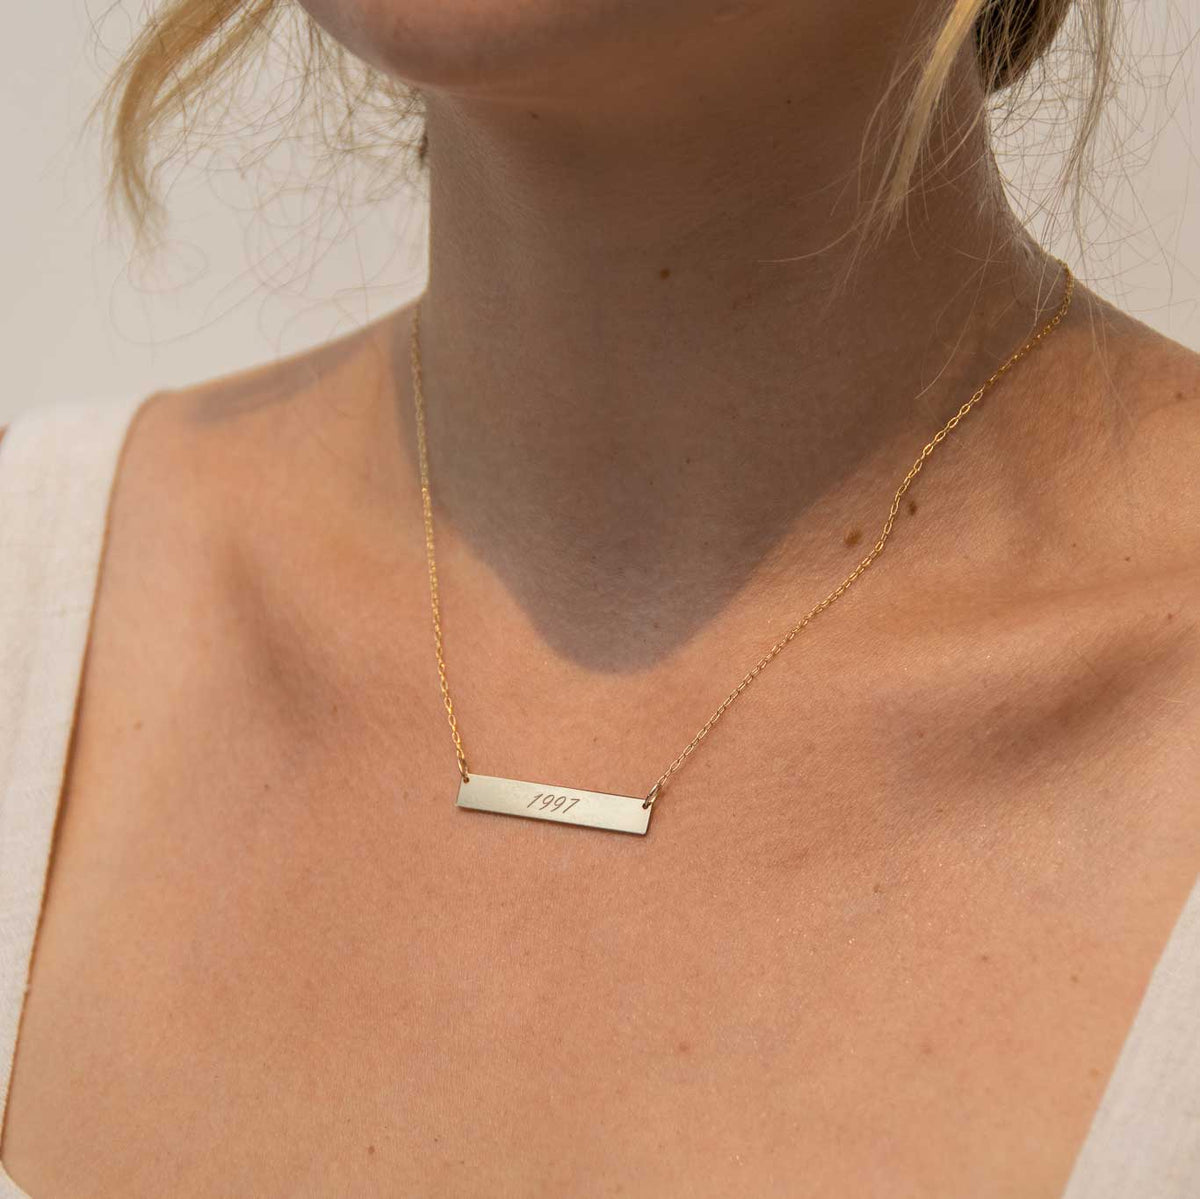 Rectangle bar necklace worn by a woman. The rectangle has 1997 engraved with the script font